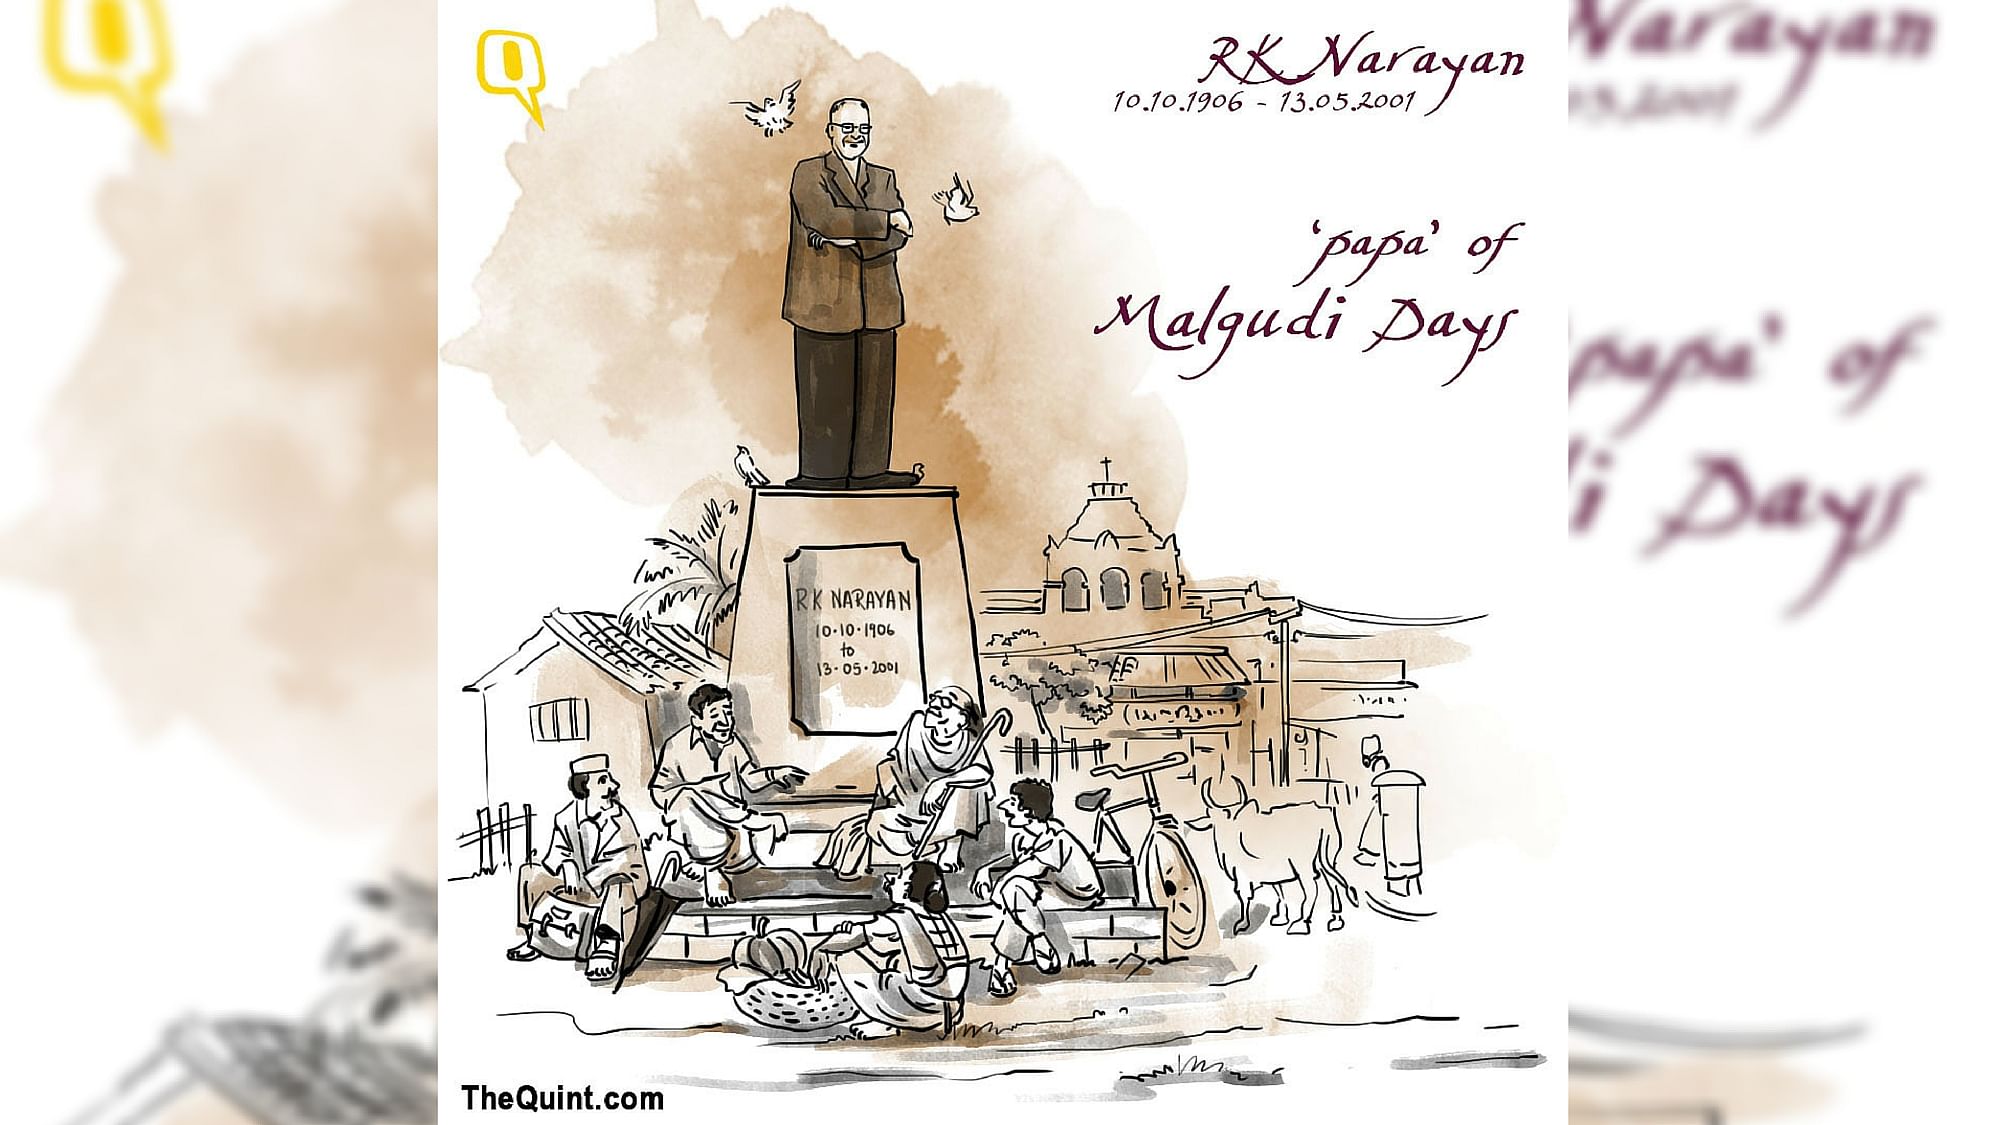 RK Narayan is known for his simple, subtle yet humorous style of writing.